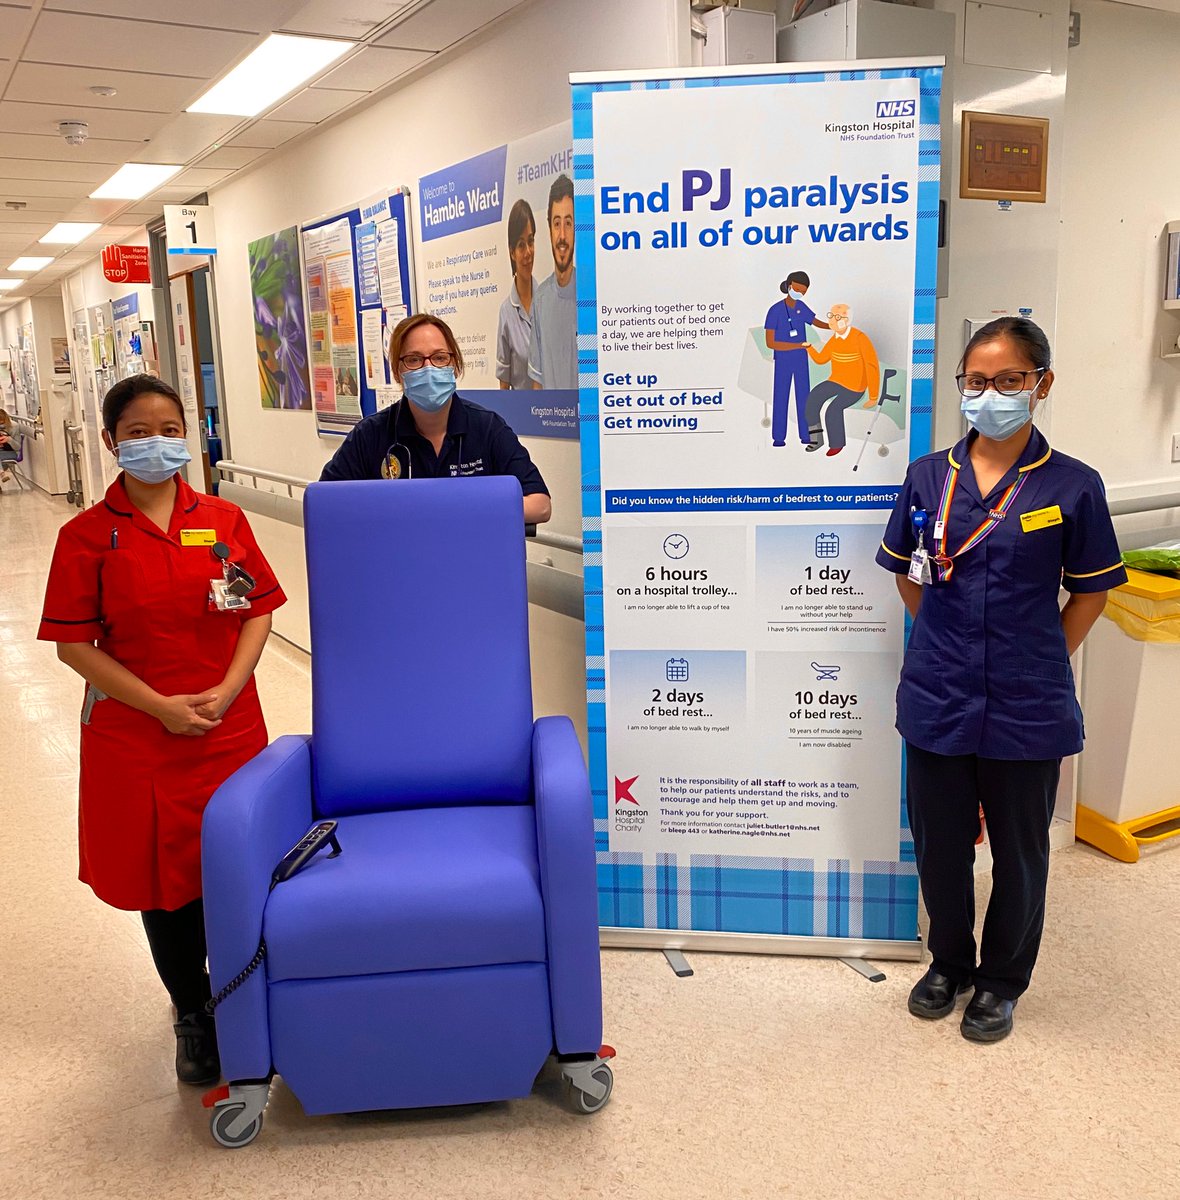 Me and @julietb08972952 had a delivery of some new rise and recliner chairs, thanks to the ongoing support from @KHFTCharity 💙 distributed to all wards, including CDU to support our patients and staff to #endPJparalysis @BrianwDolan @eraderecht @BereniceConstab @NicholaKane2